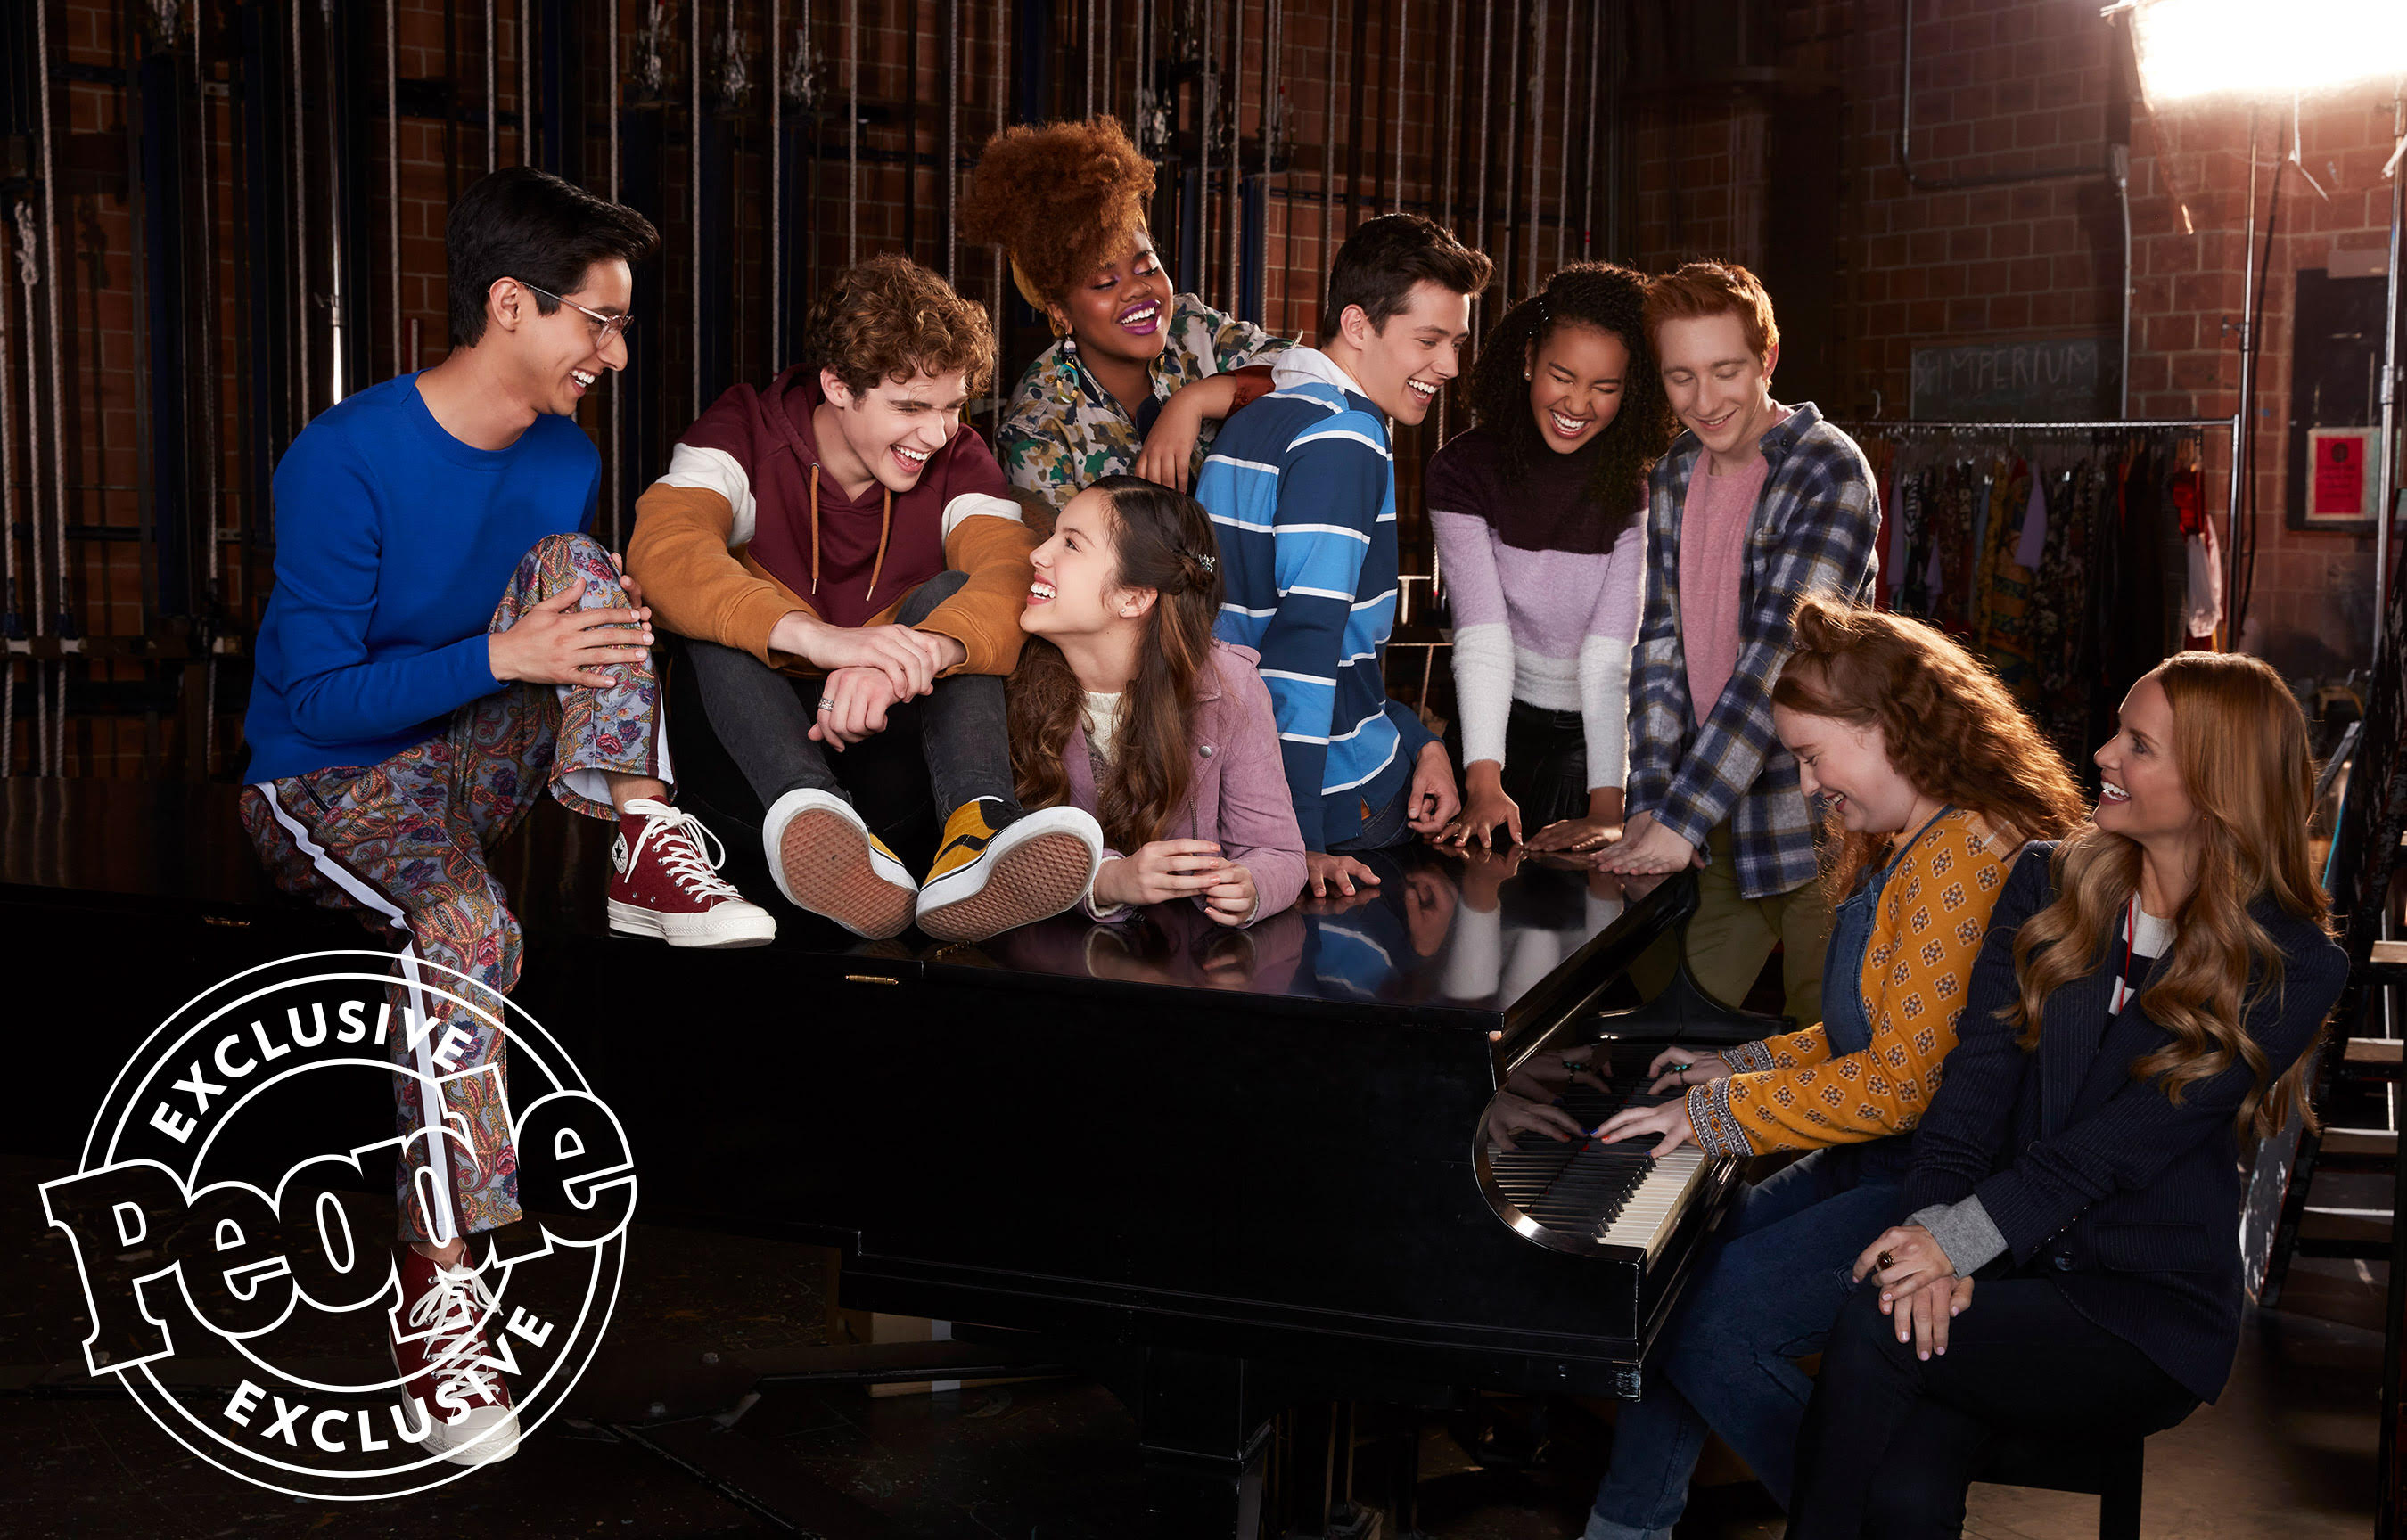 First Look at ‘High School Musical: The Musical: The Series’ on Disney+